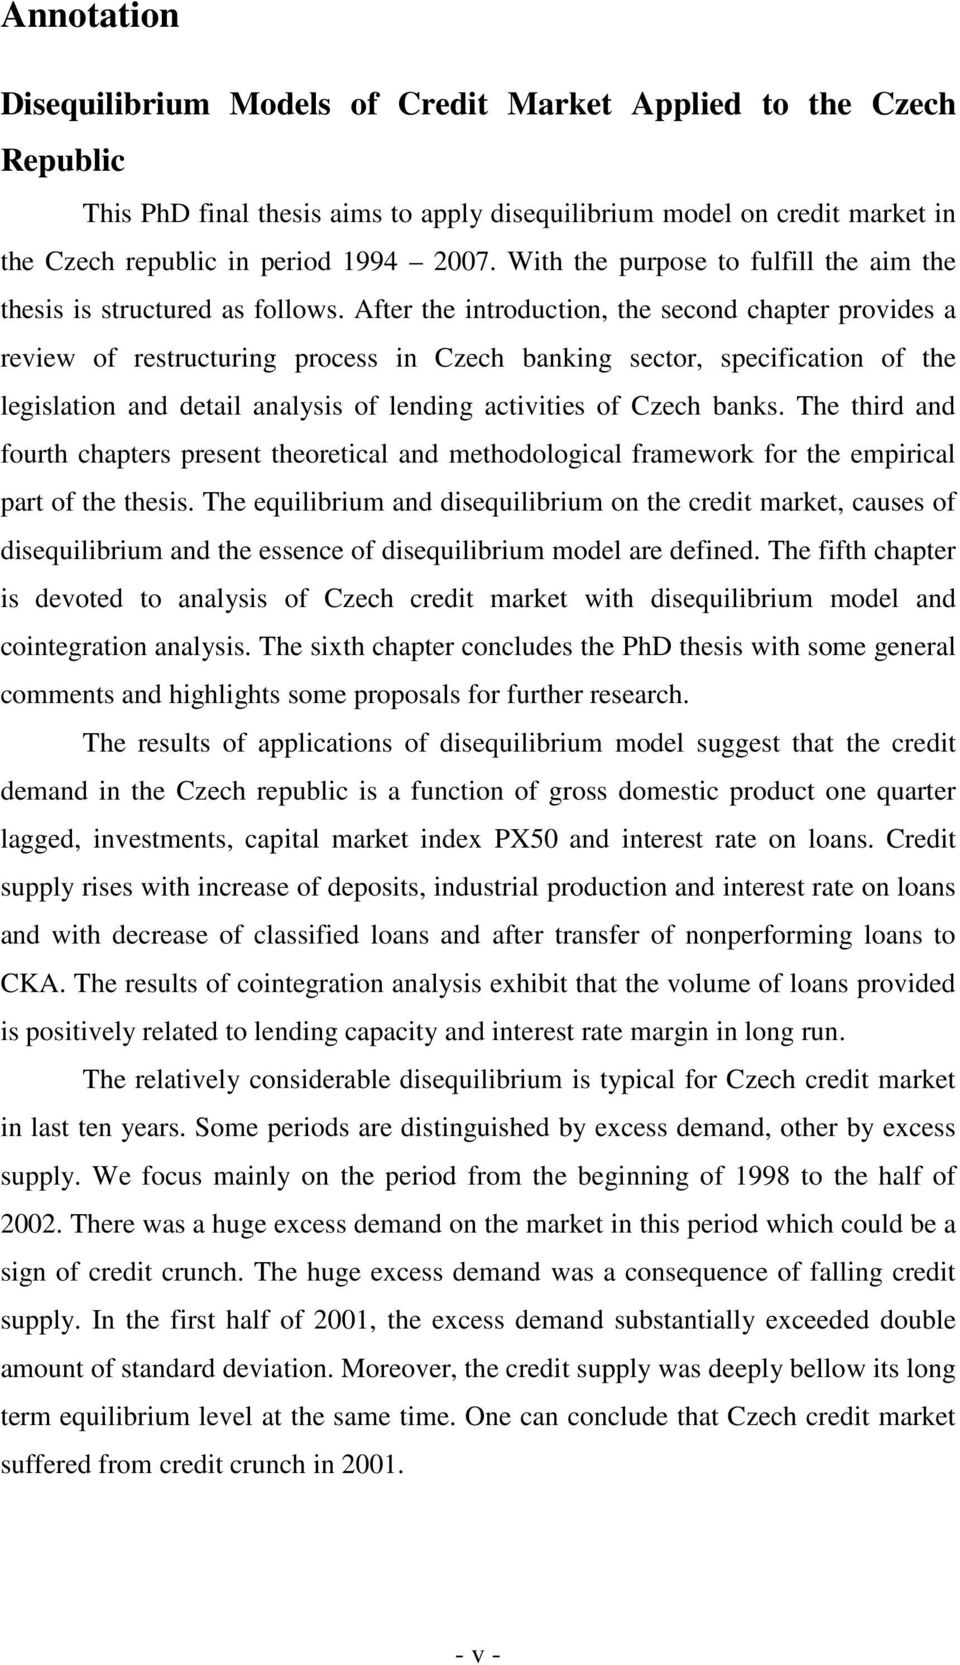 Afer he inroducion, he second chaper provides a review of resrucuring process in Czech banking secor, specificaion of he legislaion and deail analysis of lending aciviies of Czech banks.